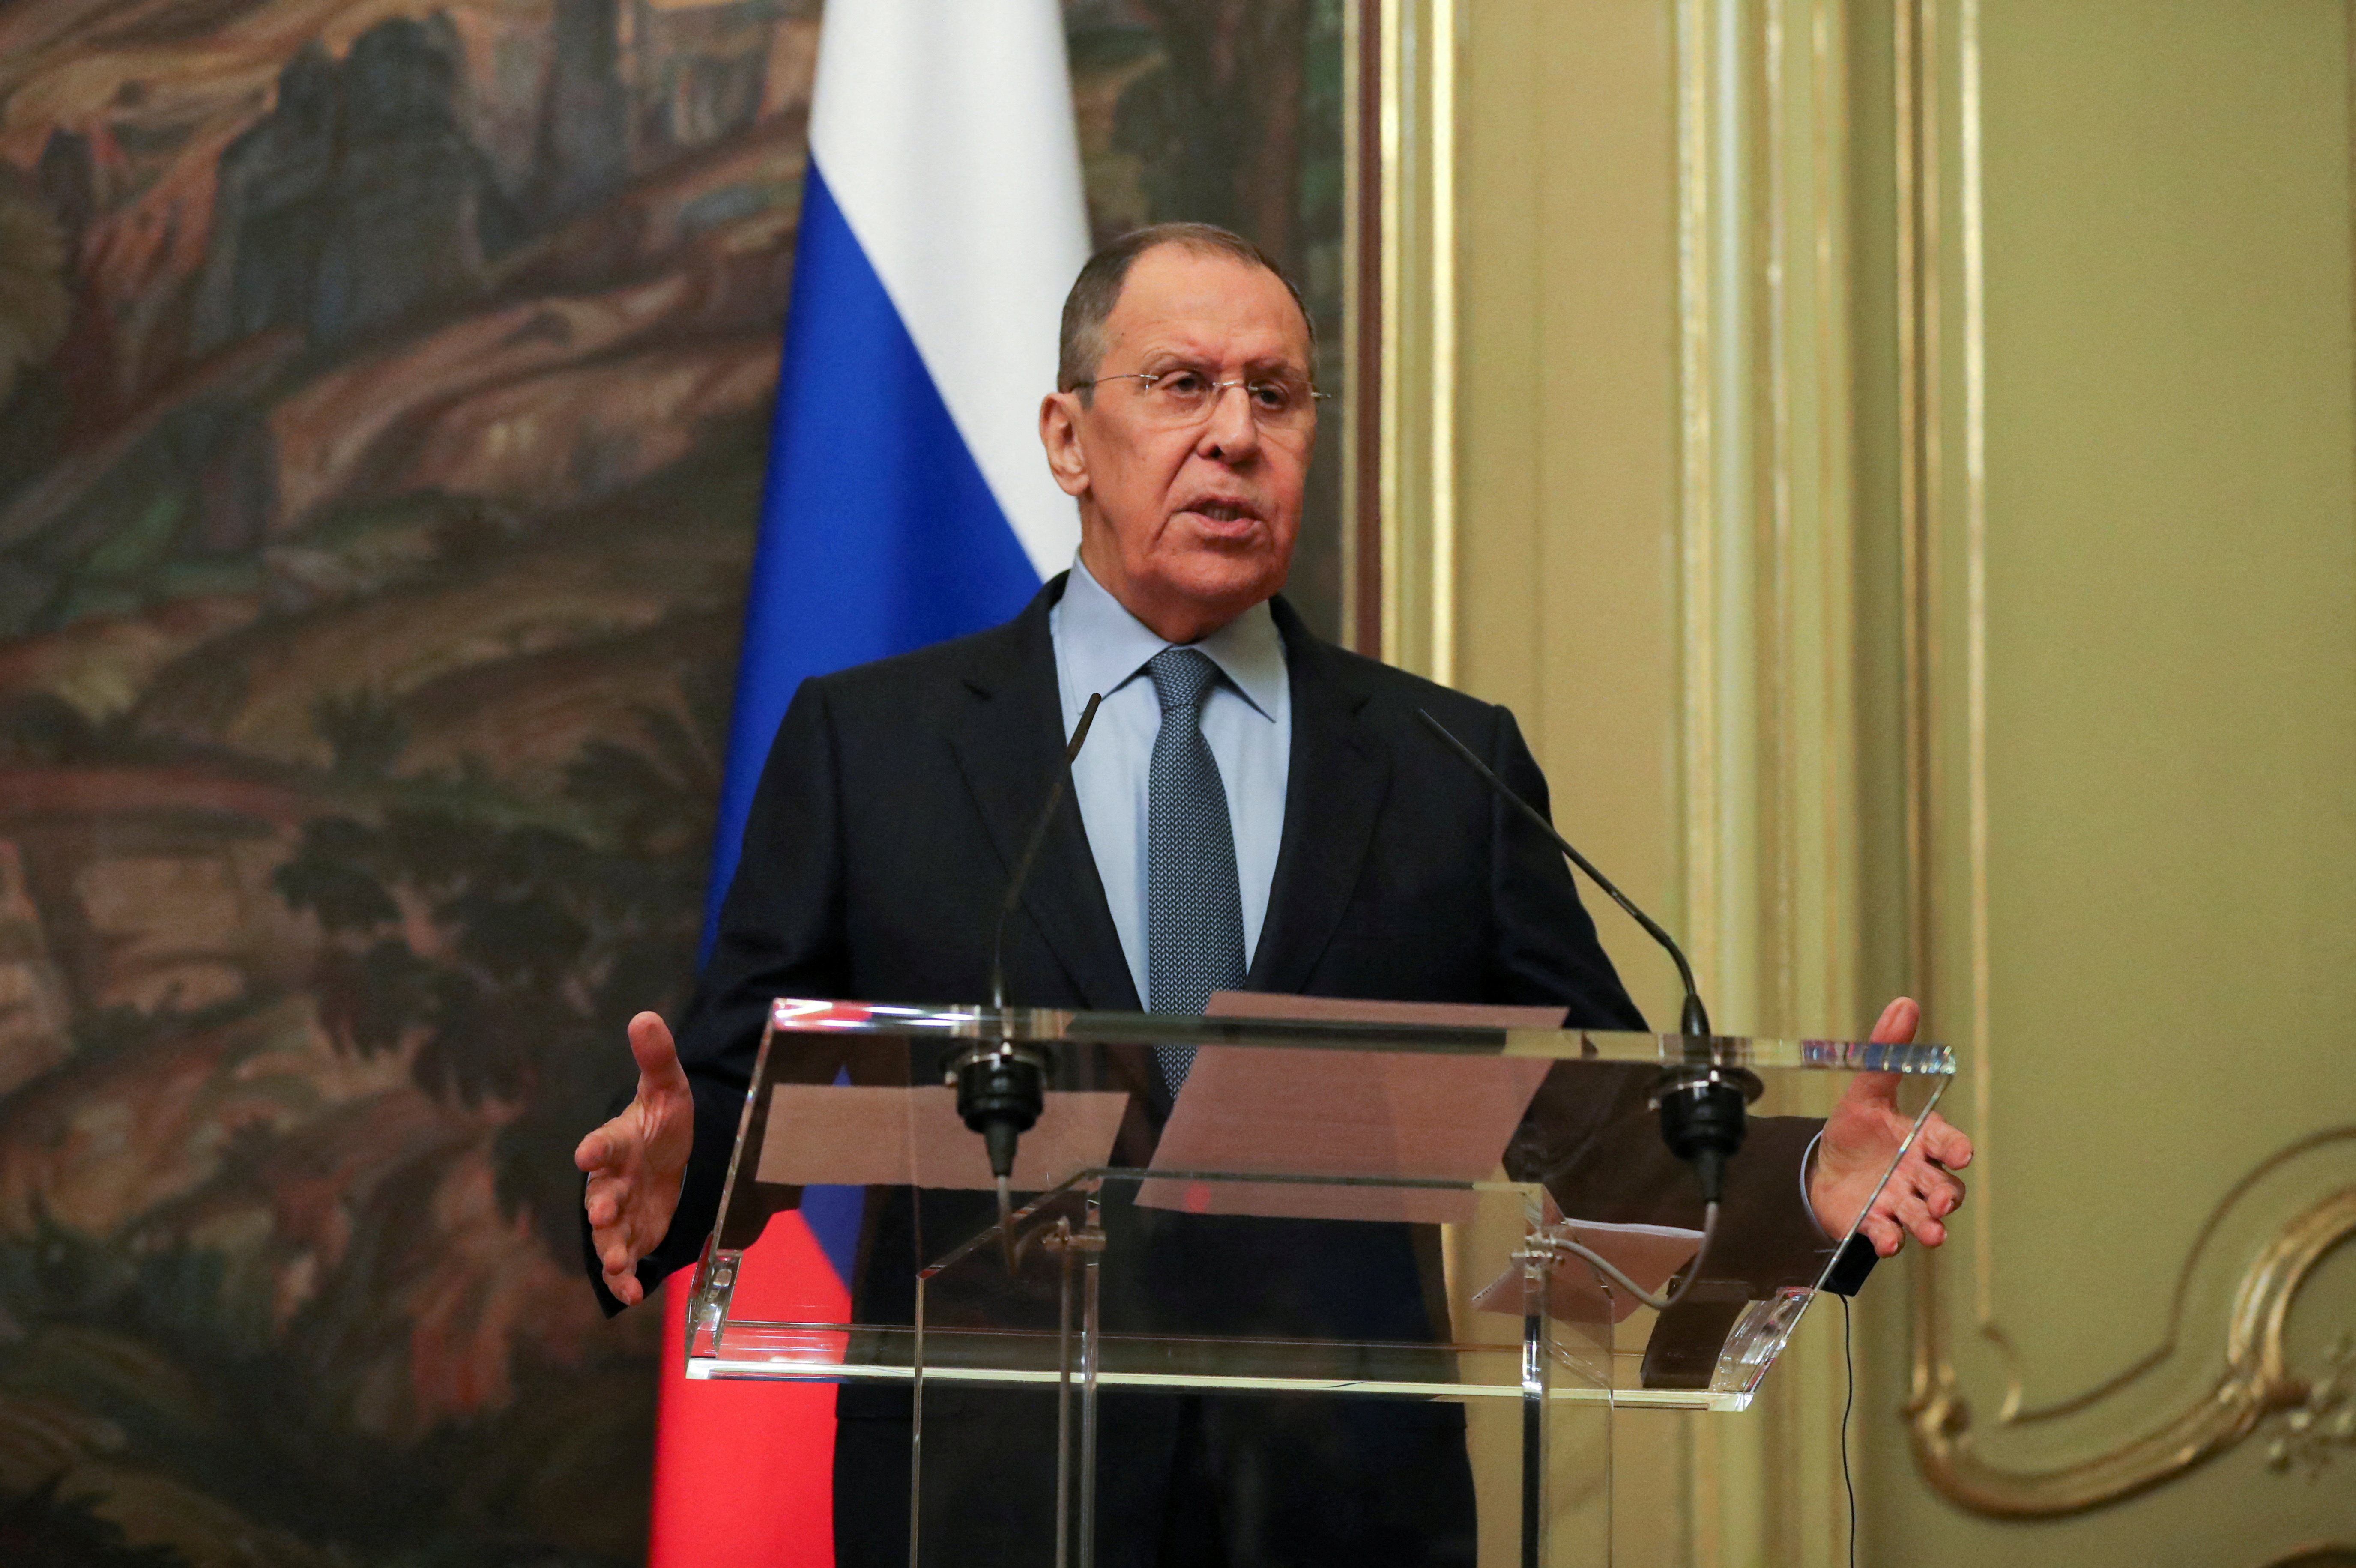 Russian Foreign Minister Sergei Lavrov speaks during a news conference after his meeting with UN Secretary-General Antonio Guterres in Moscow, Russia, April 26, 2022. Maxim Shipenkov/Pool via REUTERS/File Photo